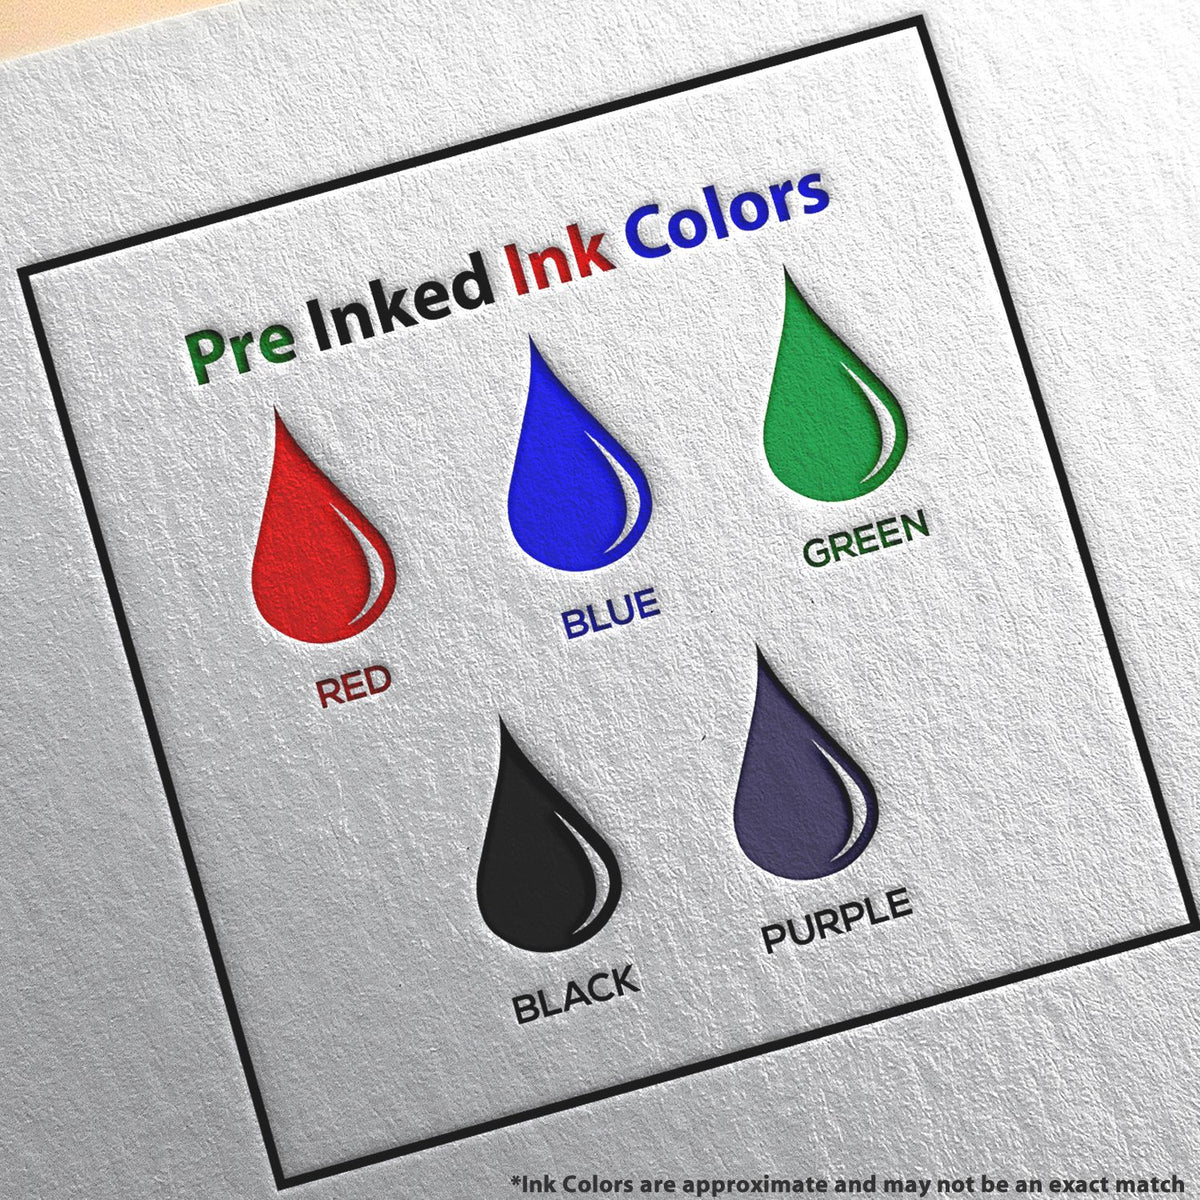 A picture showing the different ink colors or hues available for the Slim Pre-Inked Nevada Landscape Architect Seal Stamp product.